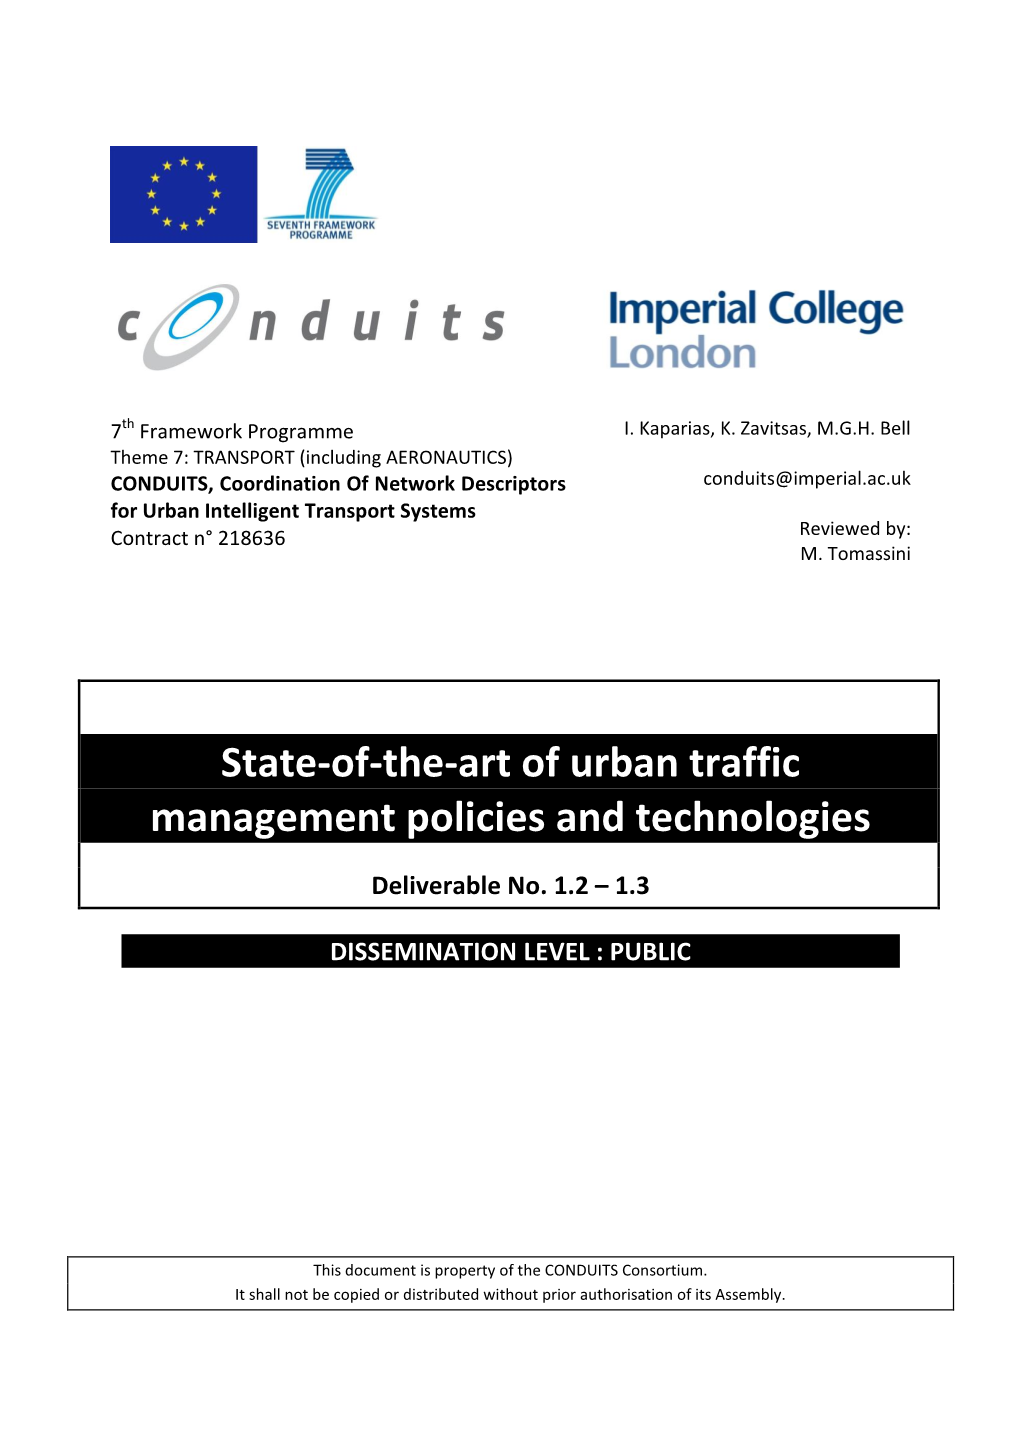 State-Of-The-Art of Urban Traffic Management Policies and Technologies